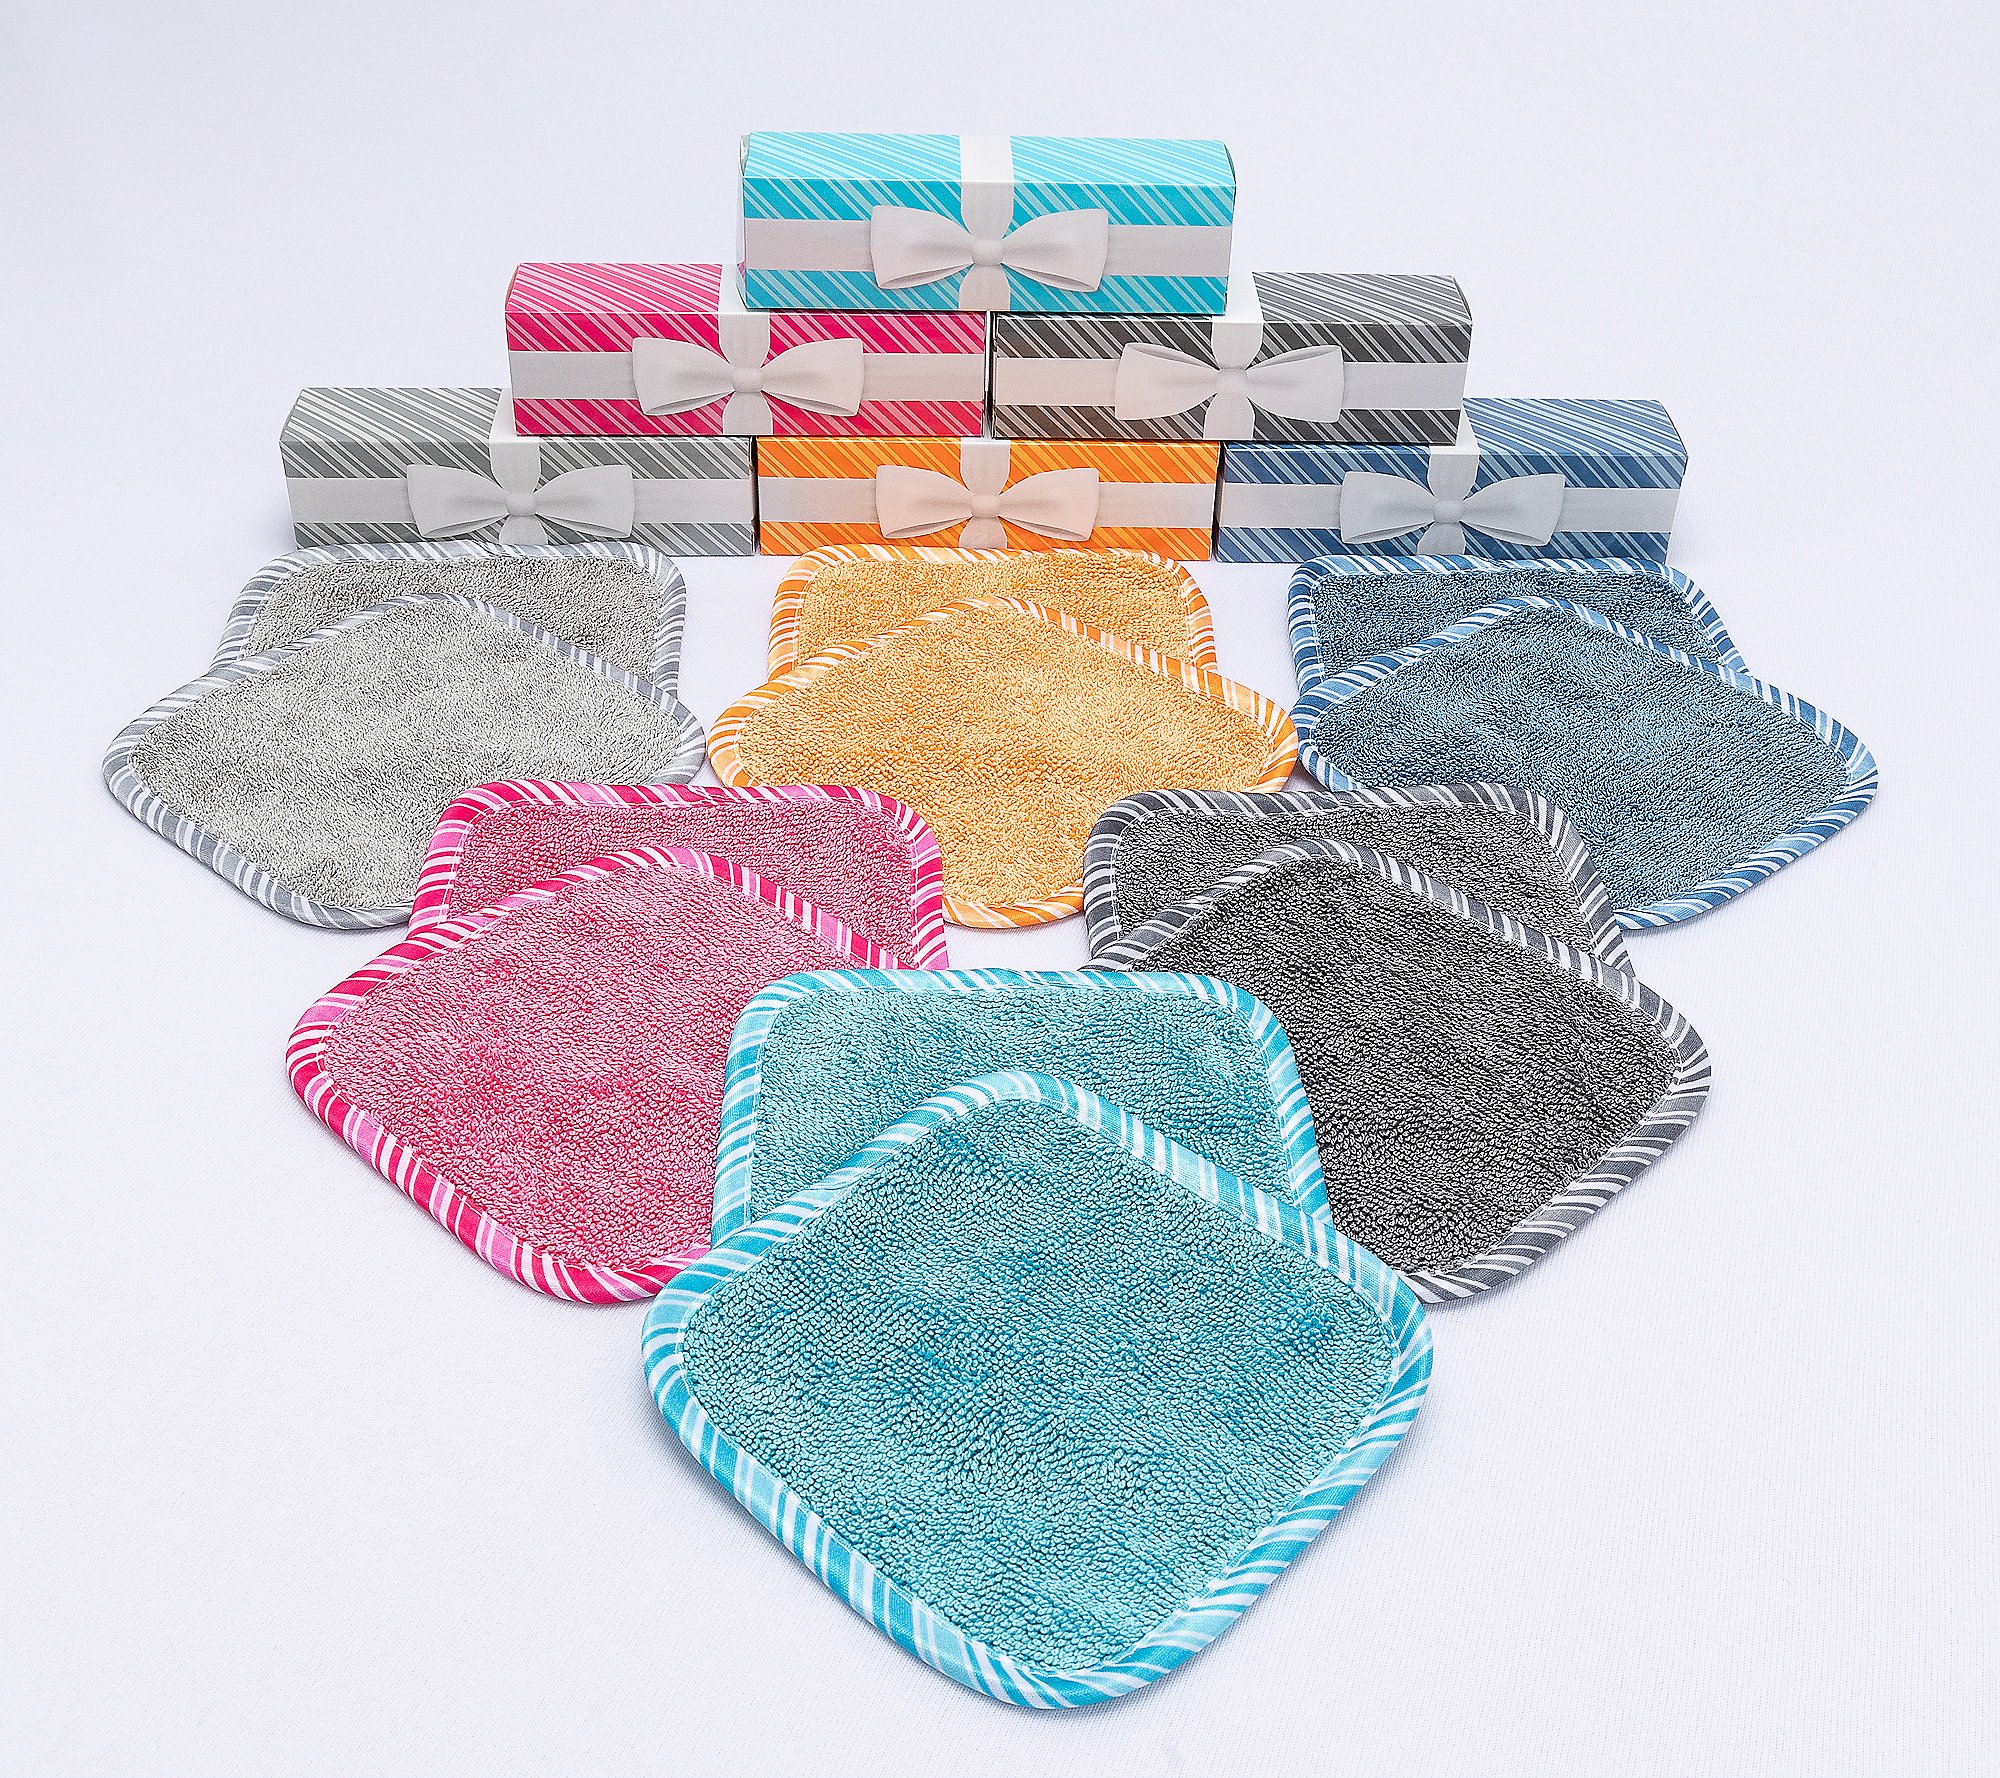 Campanelli 12-Piece 6"x6" Loopy Towels in (6) Gift Boxes